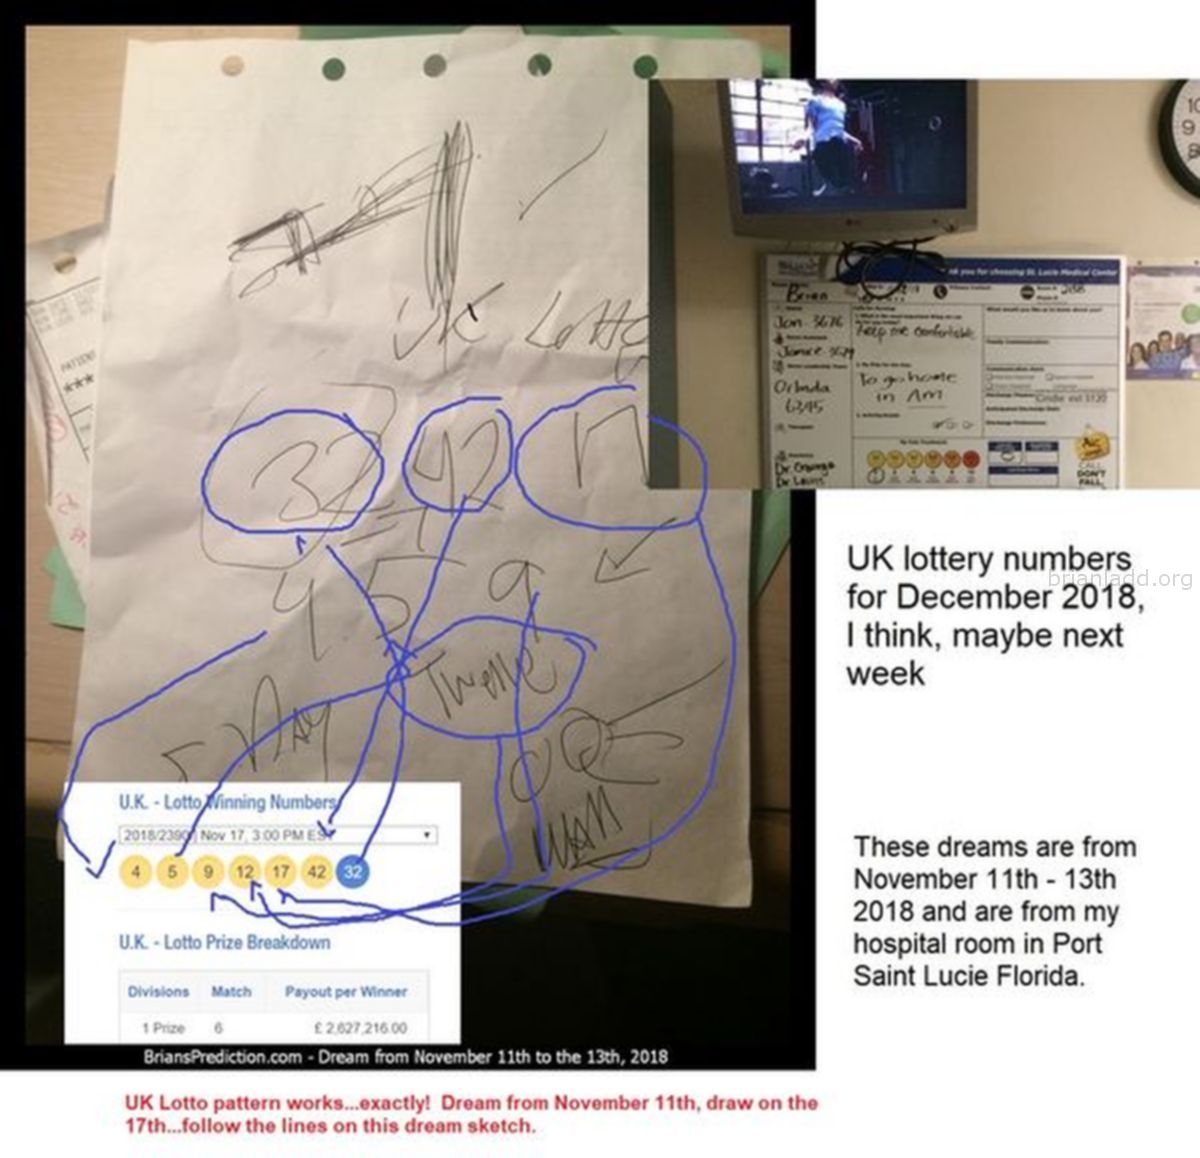 Uk Lottery Winning Prediction 11323 11 November 2018 7 - Uk Lotto Pattern Worked..Exactly!  Dream From November 11th, 20...
Uk Lotto Pattern Worked..Exactly!  Dream From November 11th, 2018 Draw On The 17th  Follow The Lines On This Dream Sketch. (again, From My Hospital Room)
